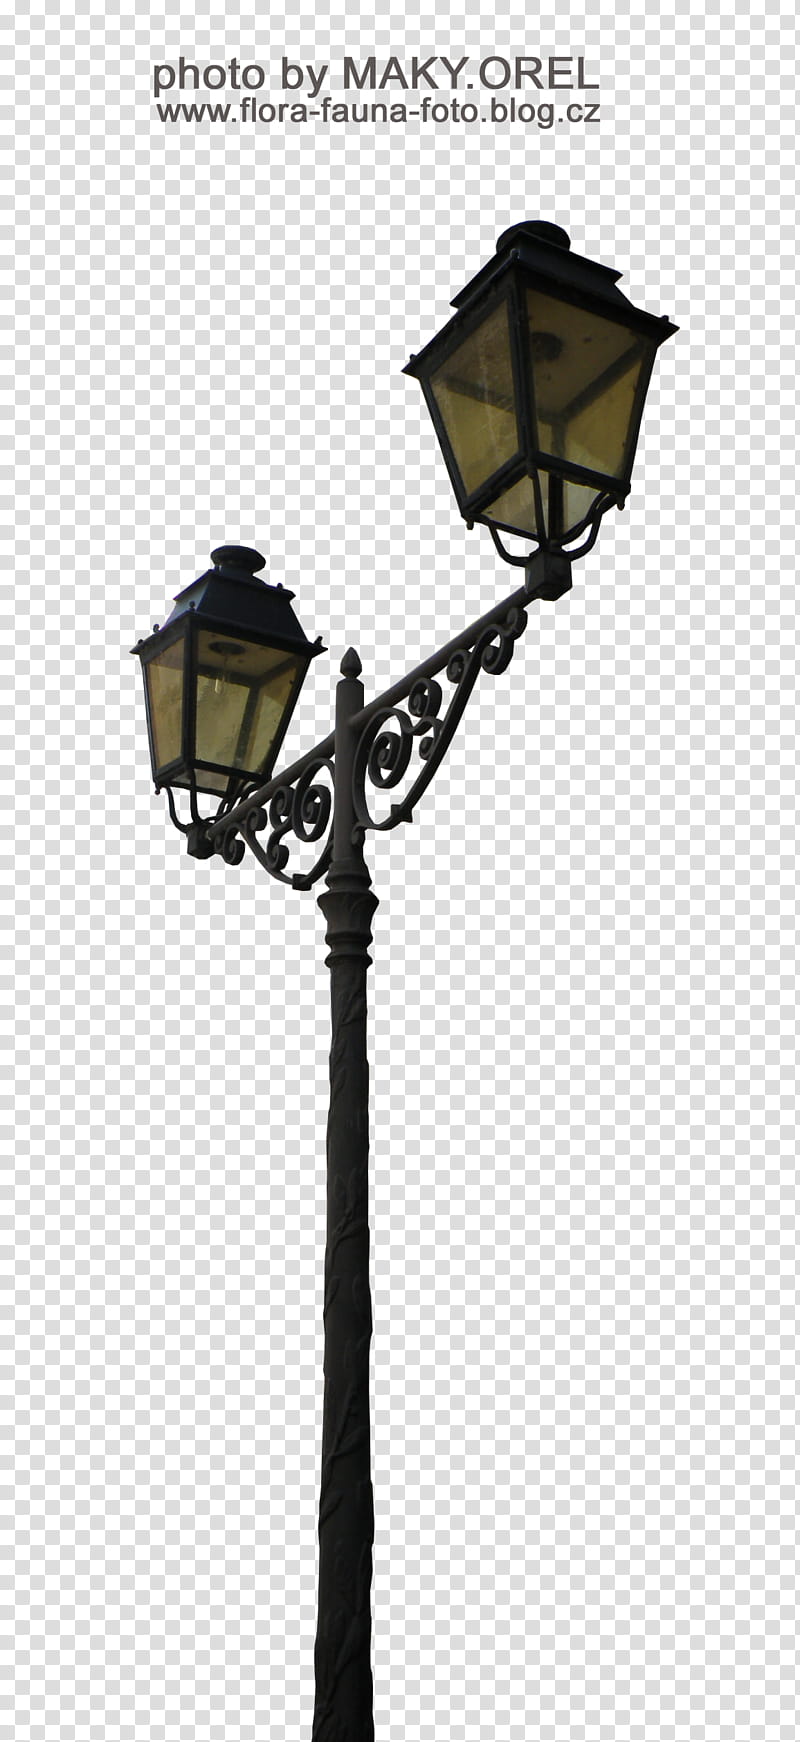 SET Street lamps, black light post with text overlay transparent background PNG clipart